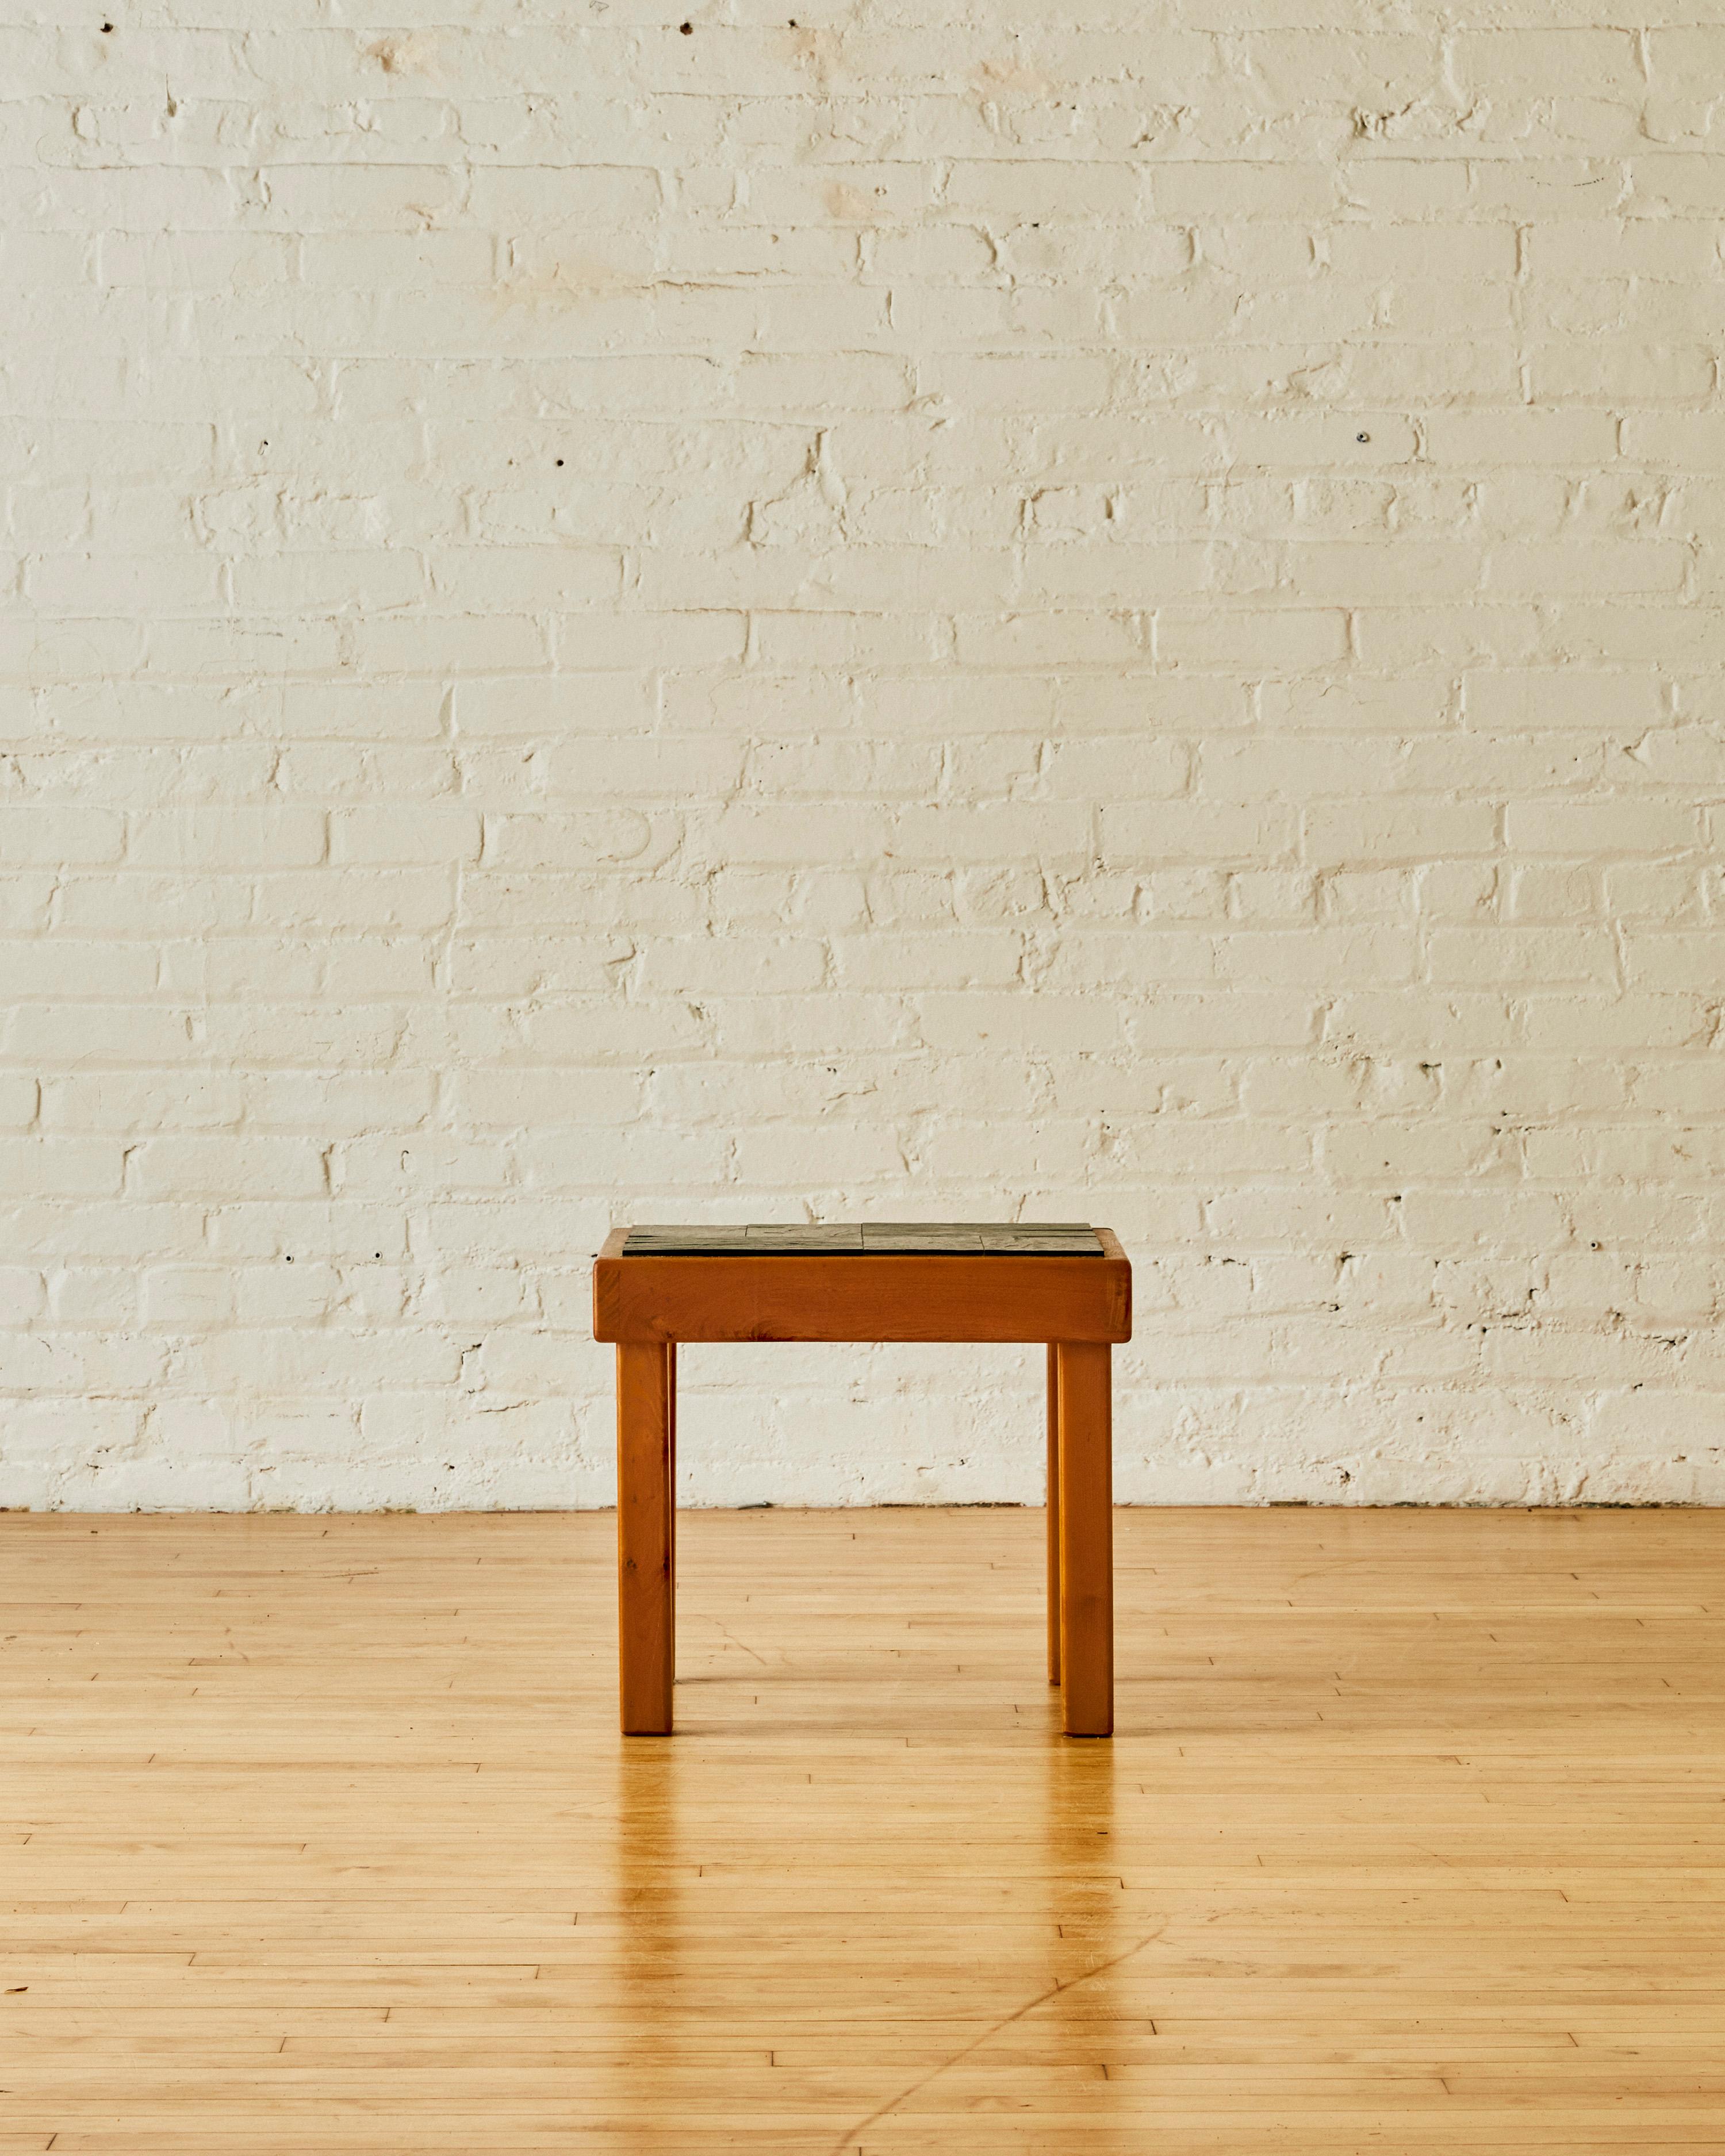 Elm side table by Pierre Chapo for Maison Regain with a slate table top C.1960

Pierre Chapo (1927-1987) was a French furniture designer and craftsman who was active in the mid-20th century. He is known for his minimalist and functional designs,